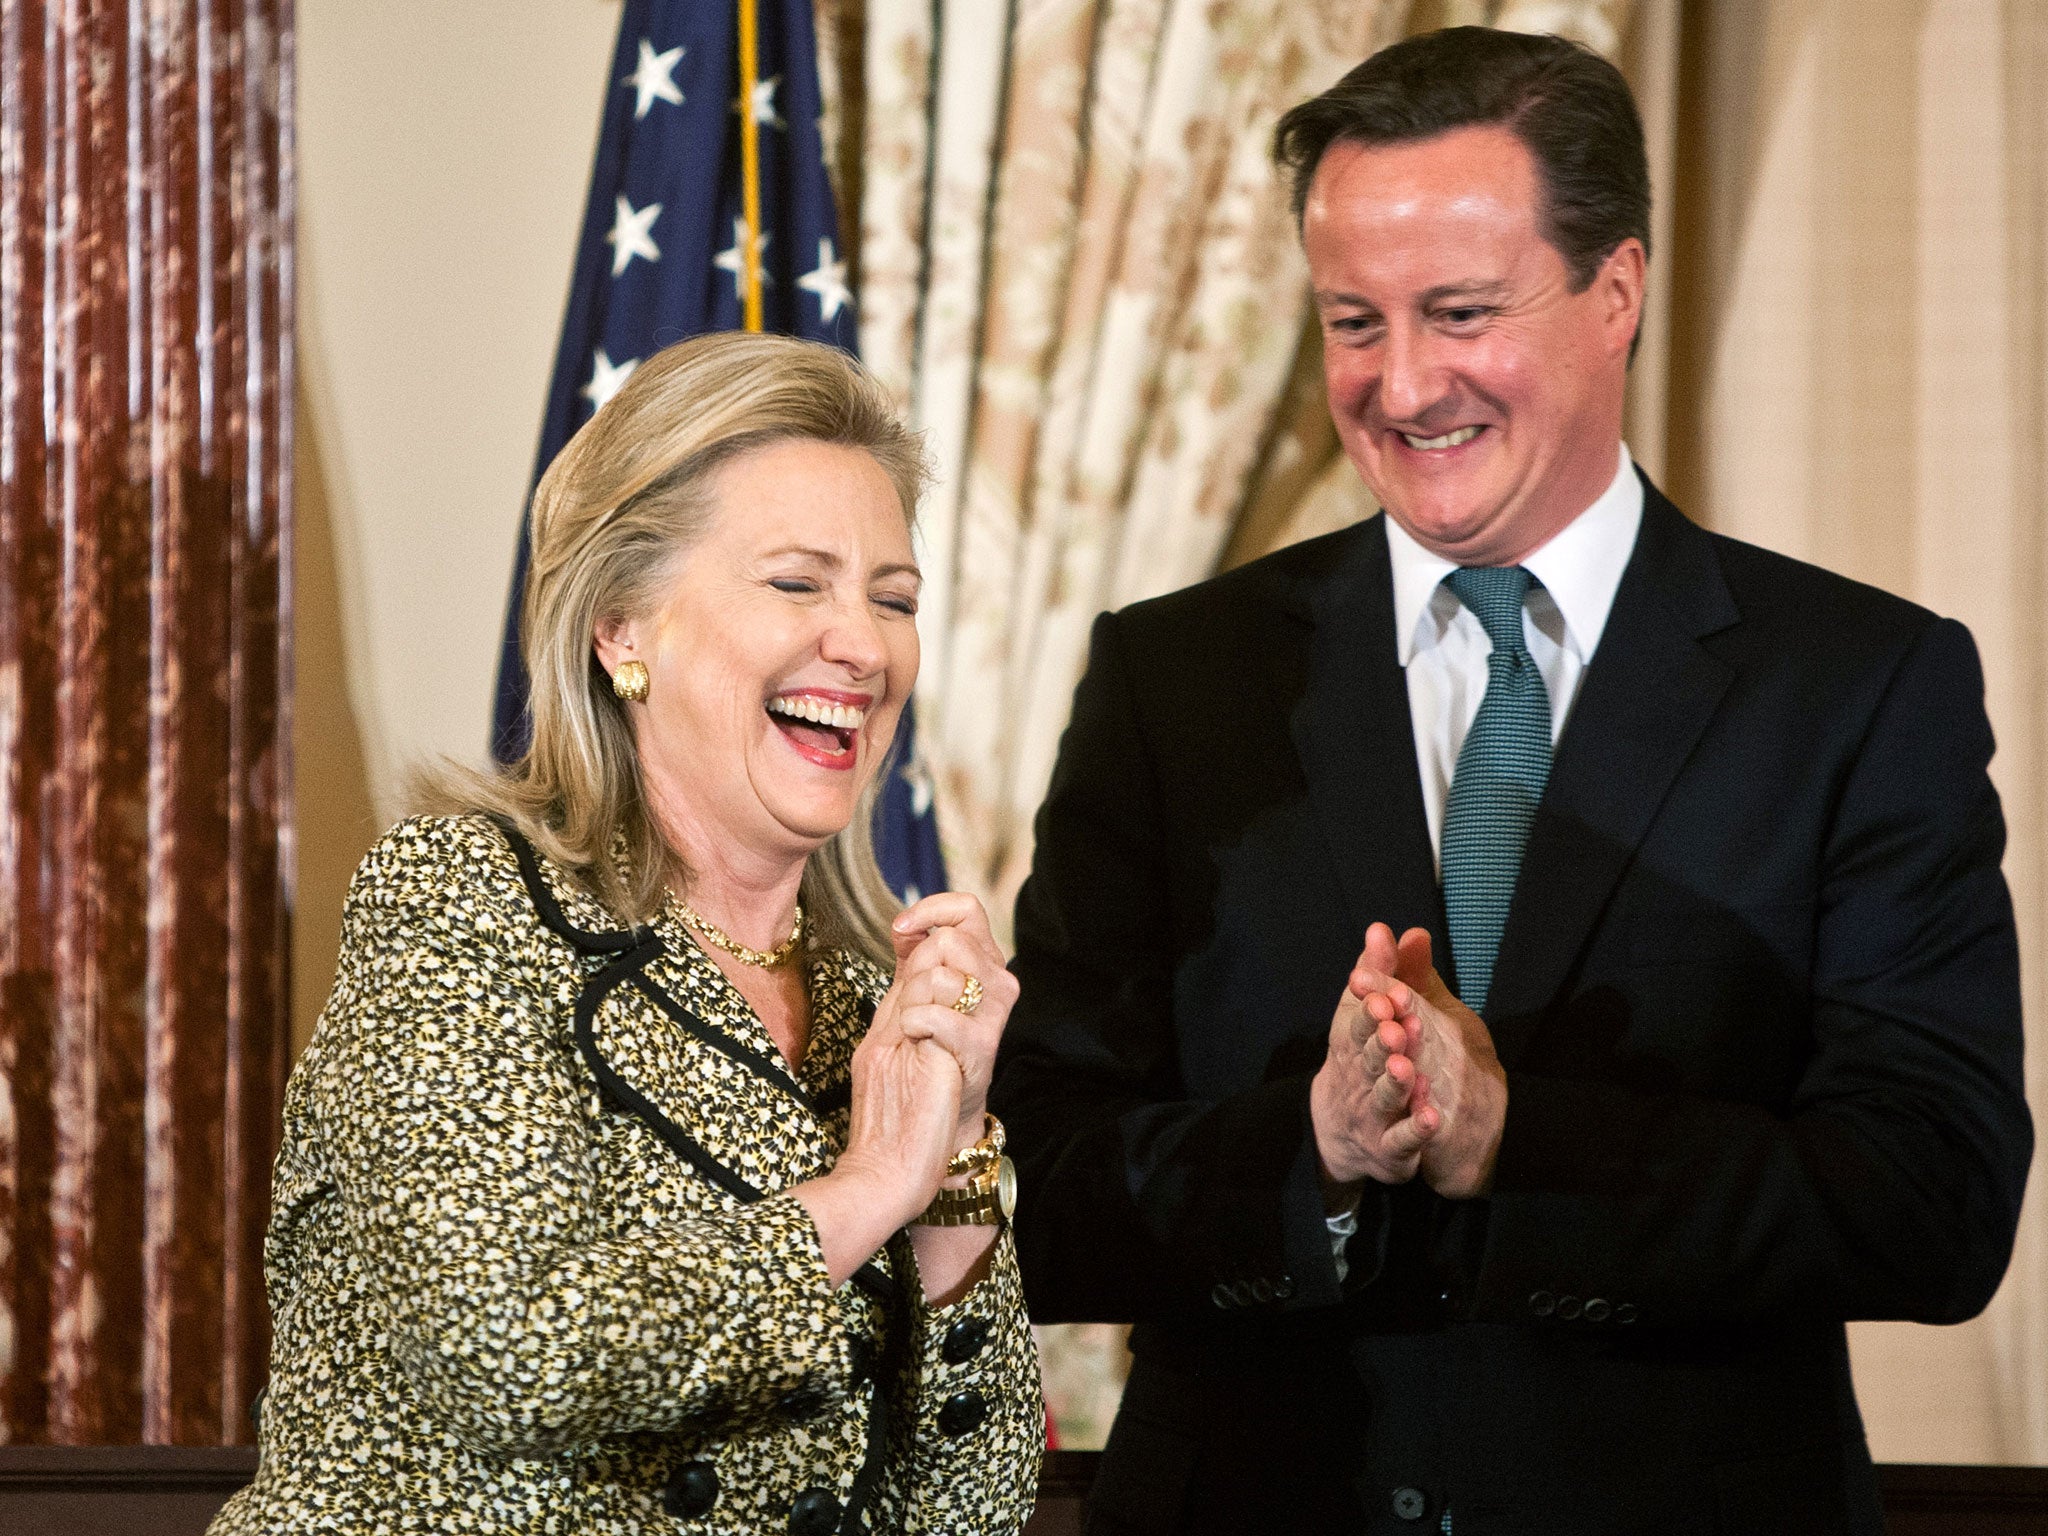 The emails released from Clinton's email system include damning criticism of David Cameron